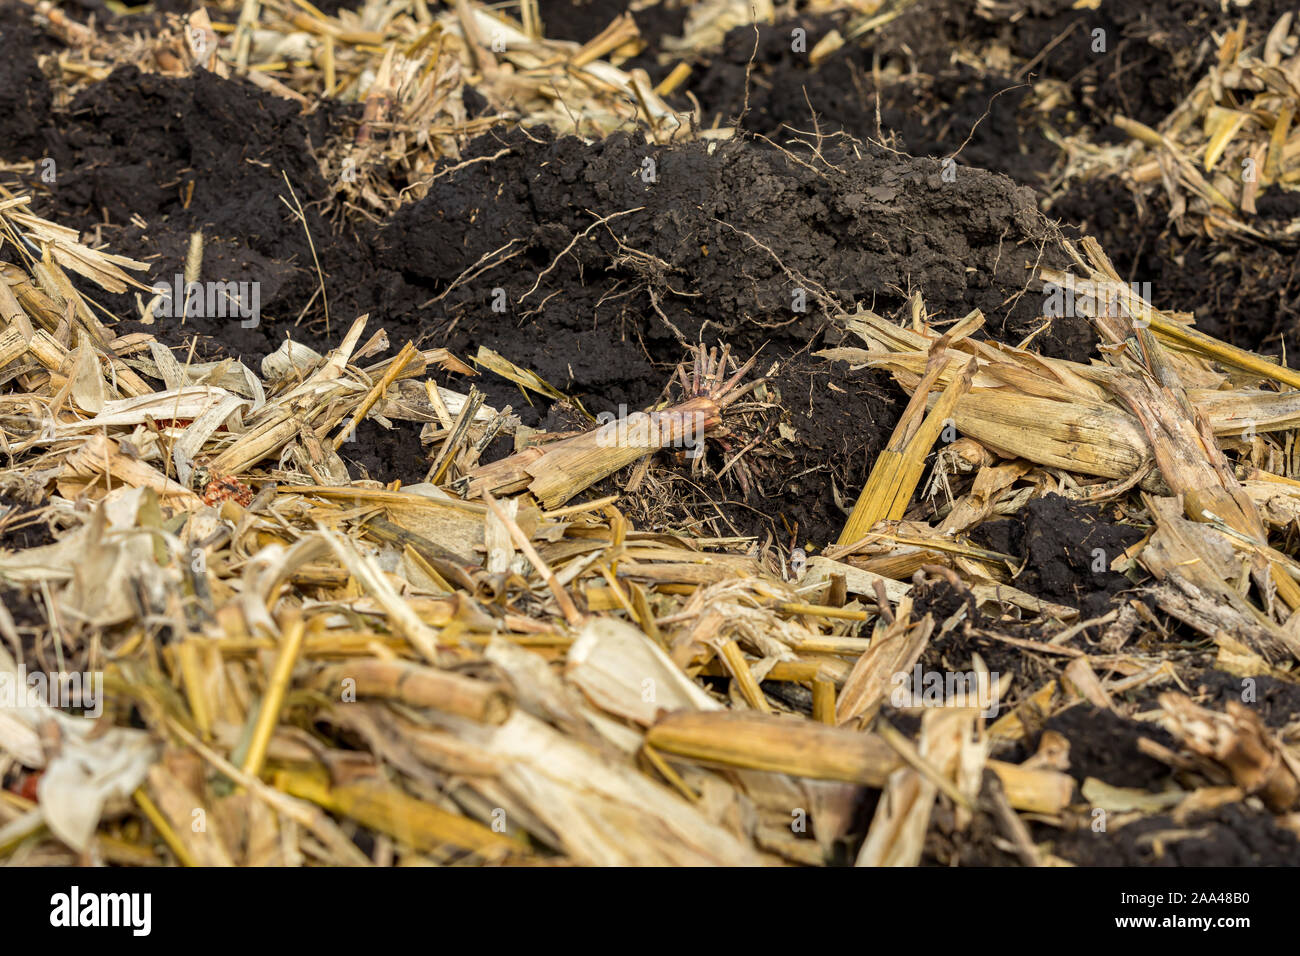 Closeup of cornfield with cornstalks and residue covered with black dirt clods after fall reduced tillage soil conservation with chisel plow Stock Photo